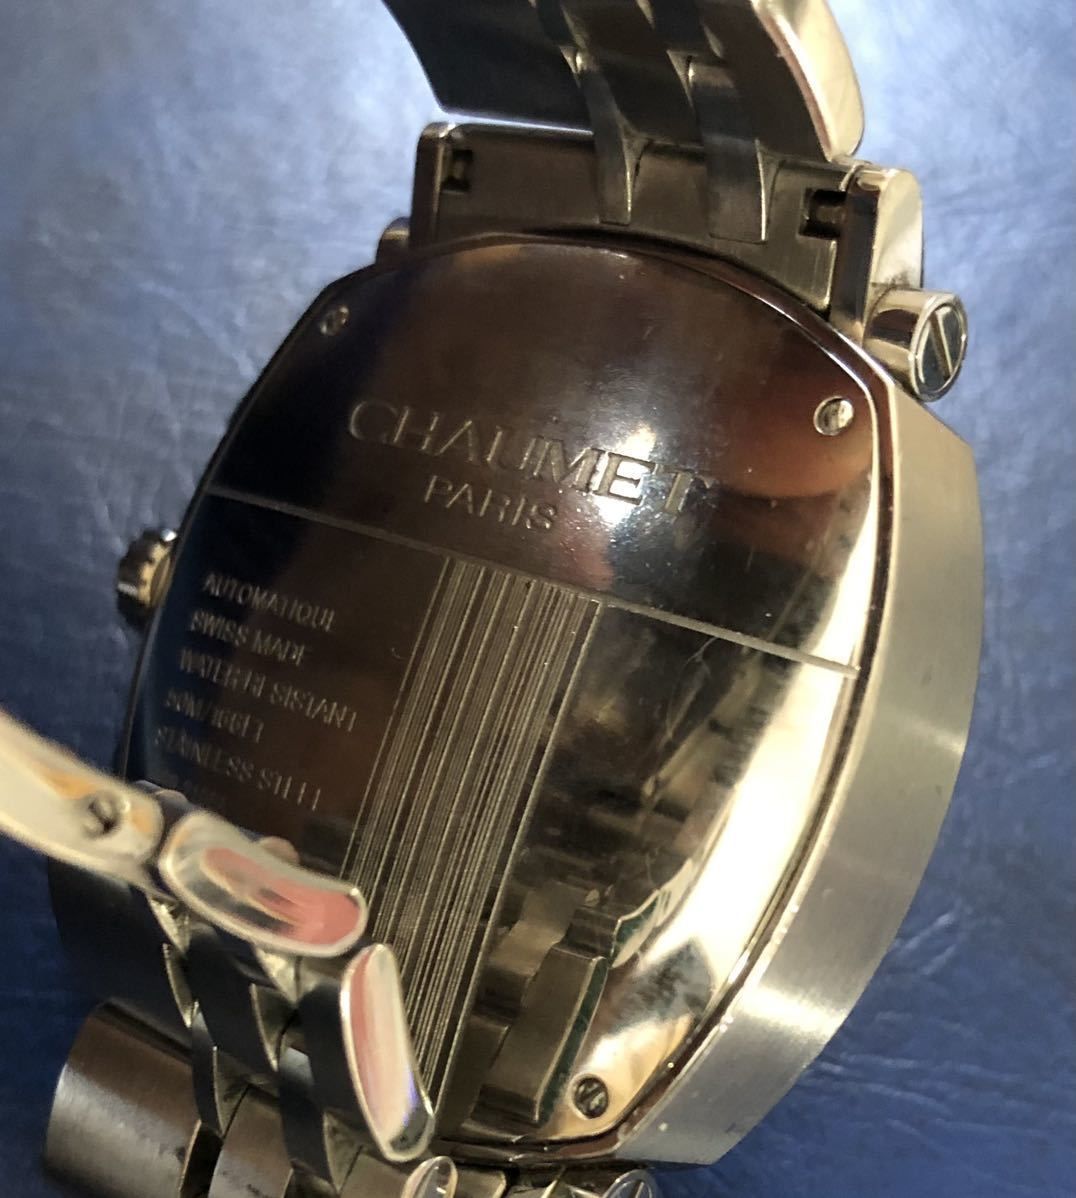 CHAUMET operation goods * Dan ti chronograph Date regular goods self-winding watch Chaumet AT automatique silver wristwatch rare ( control MT502)